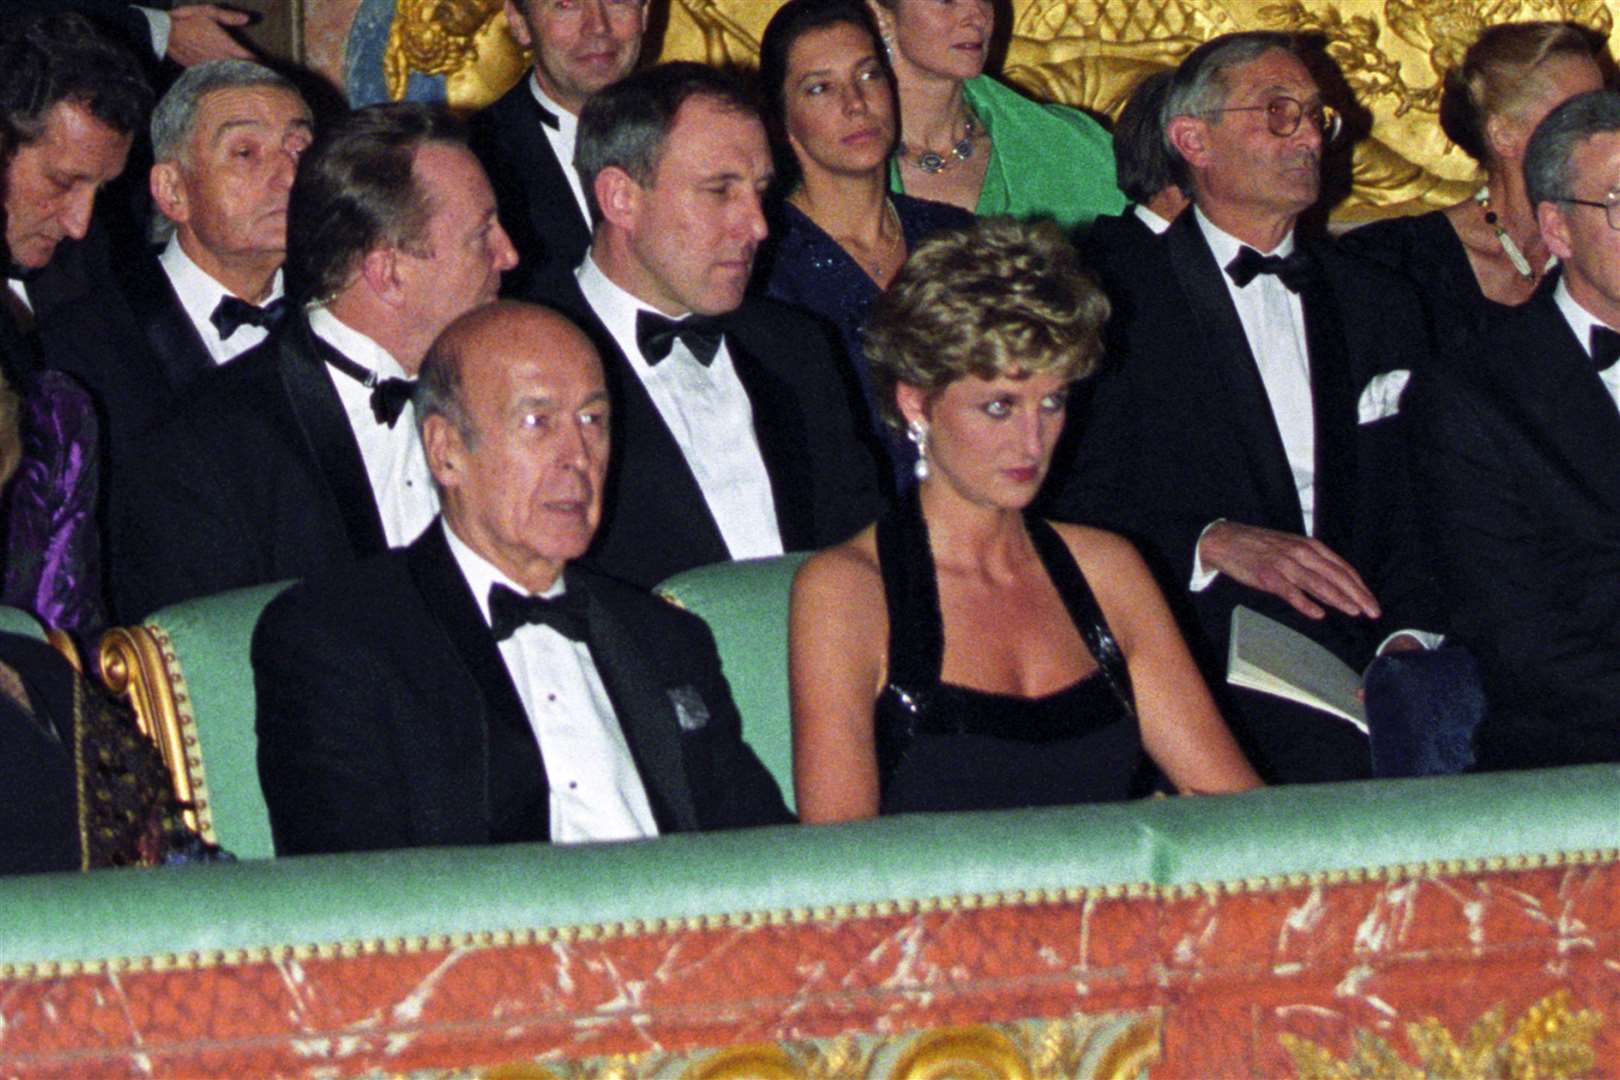 The Princess of Wales (r) and former French President Valery Giscard d’Estaing (l), awaiting the start of a charity concert at the Palace of Versailles (Martin Keene/PA)